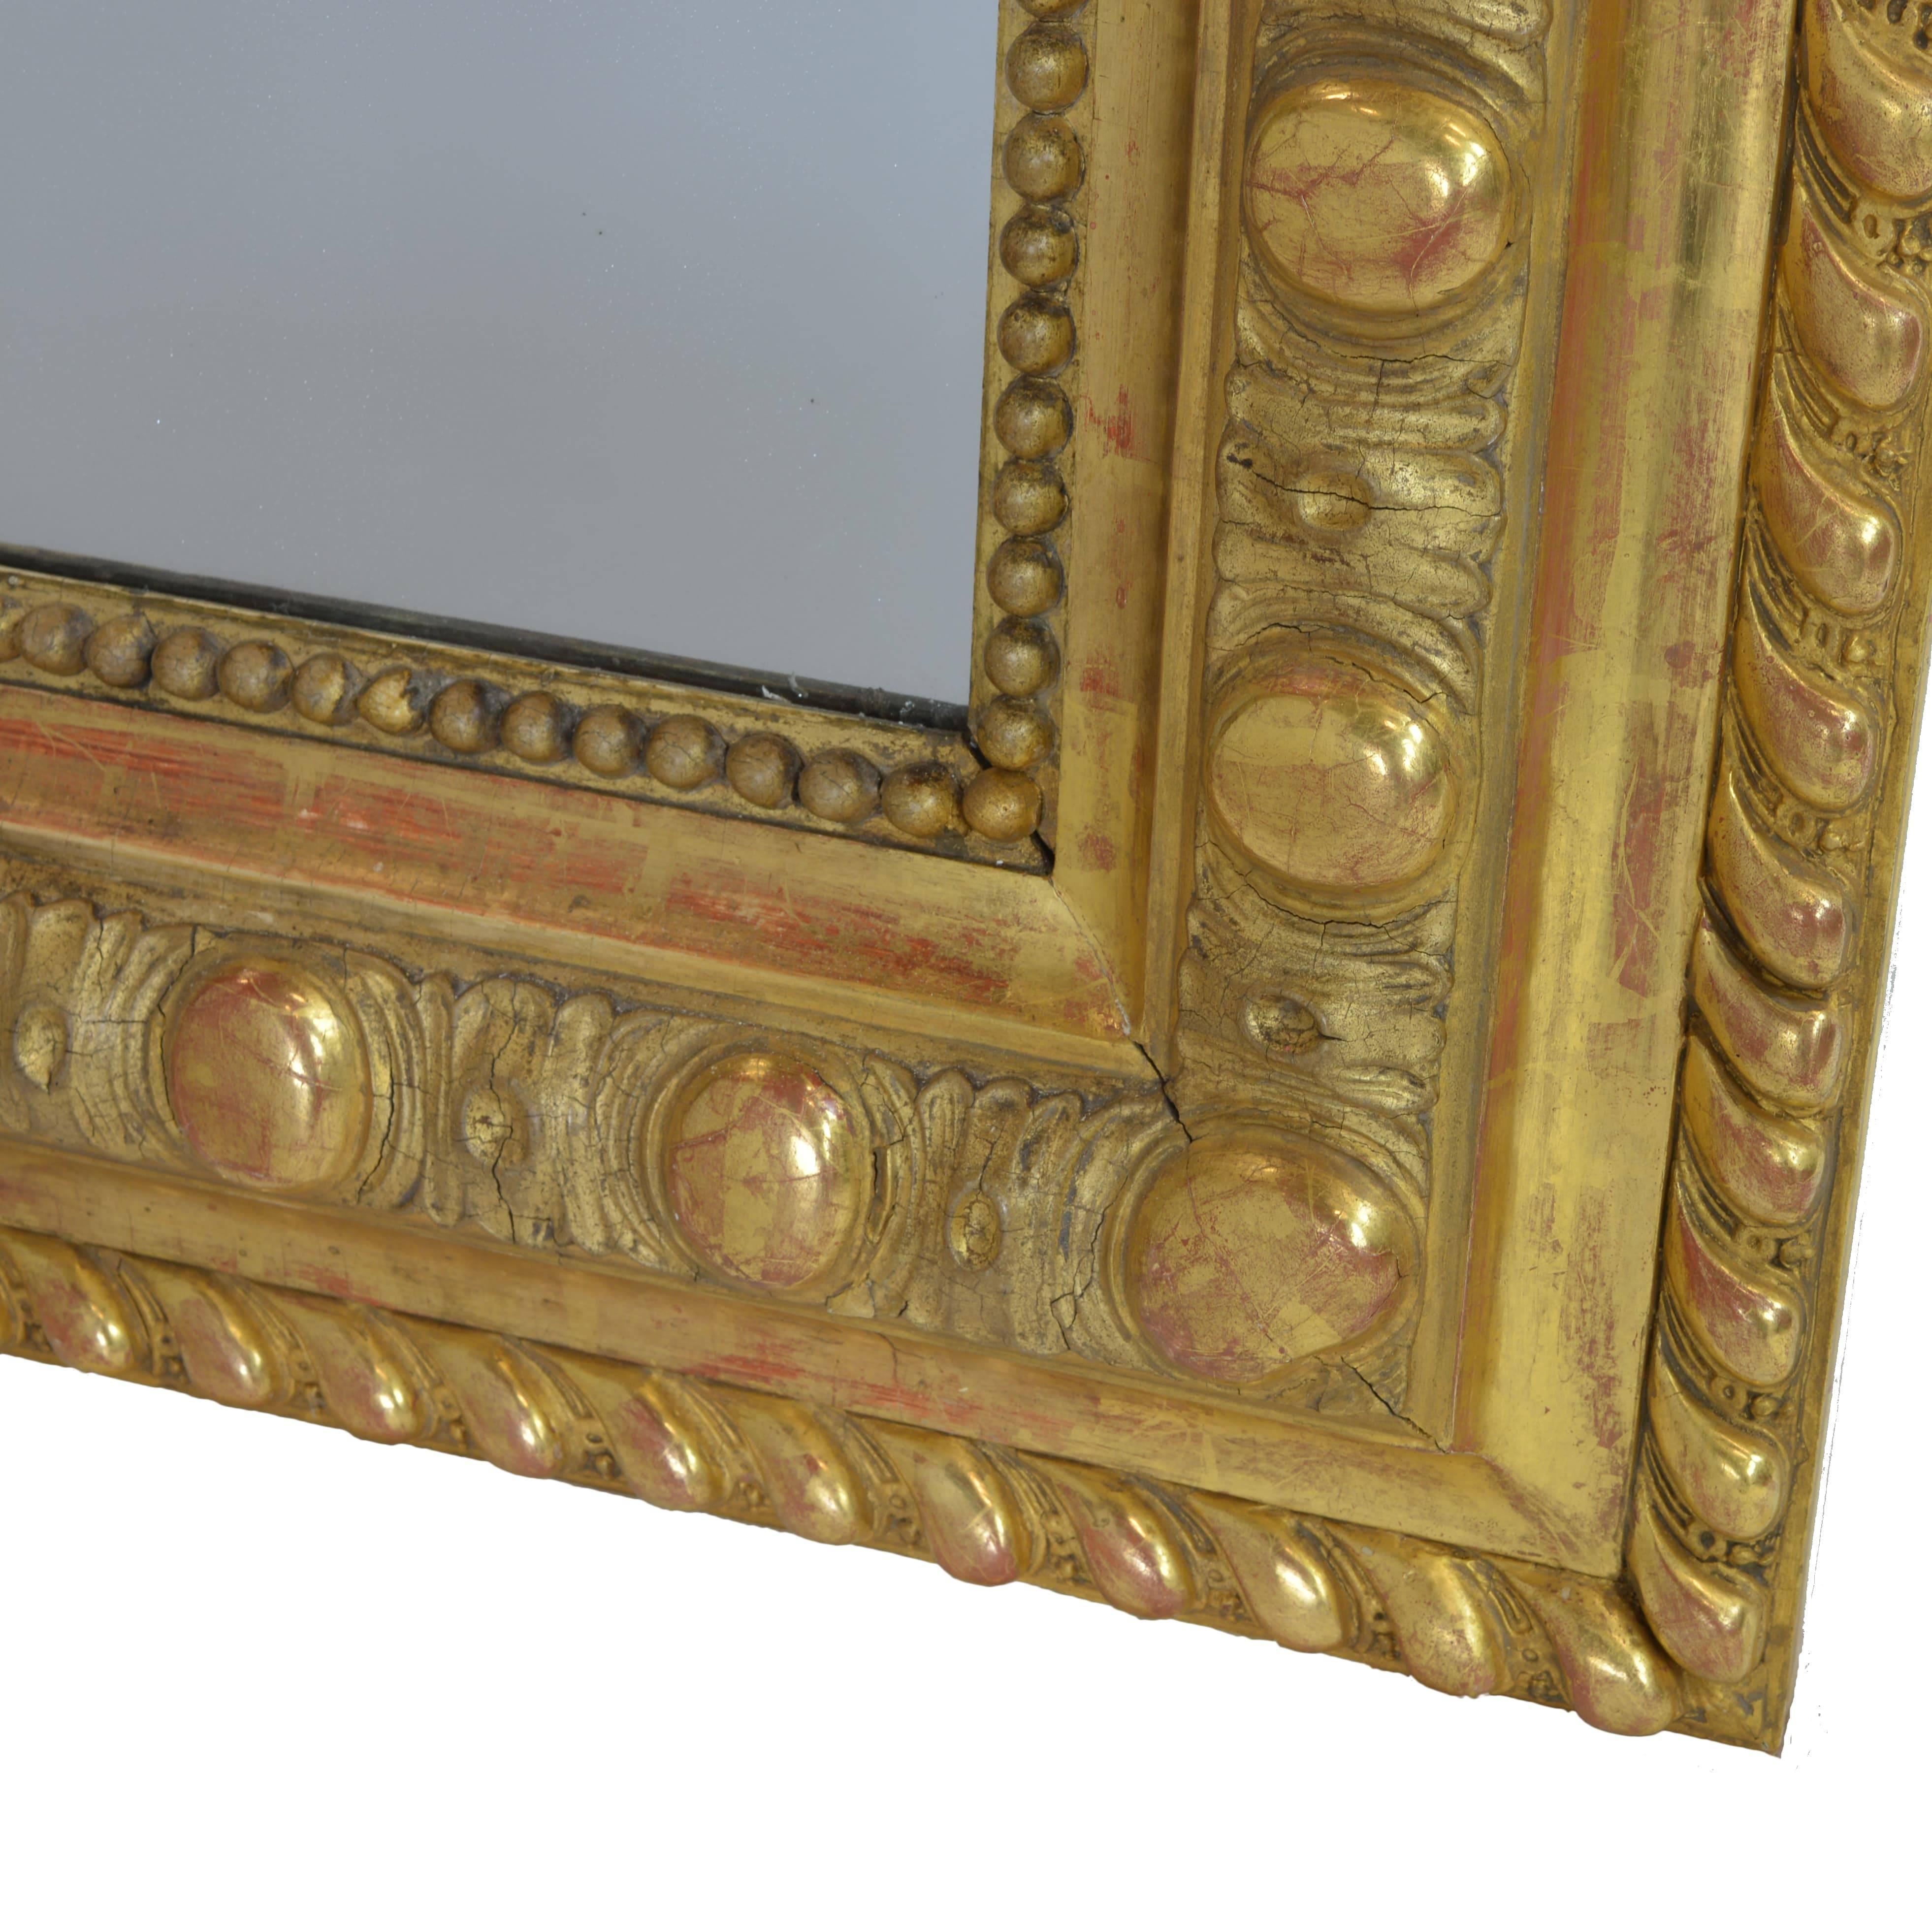 An extremely rare find. The artistic detail in the carved cherubs, floral garlands, and shield adorning the crown is such that it will hold any onlooker absolutely spellbound. The meticulously crafted, hand-carved wooden frame is gilded in